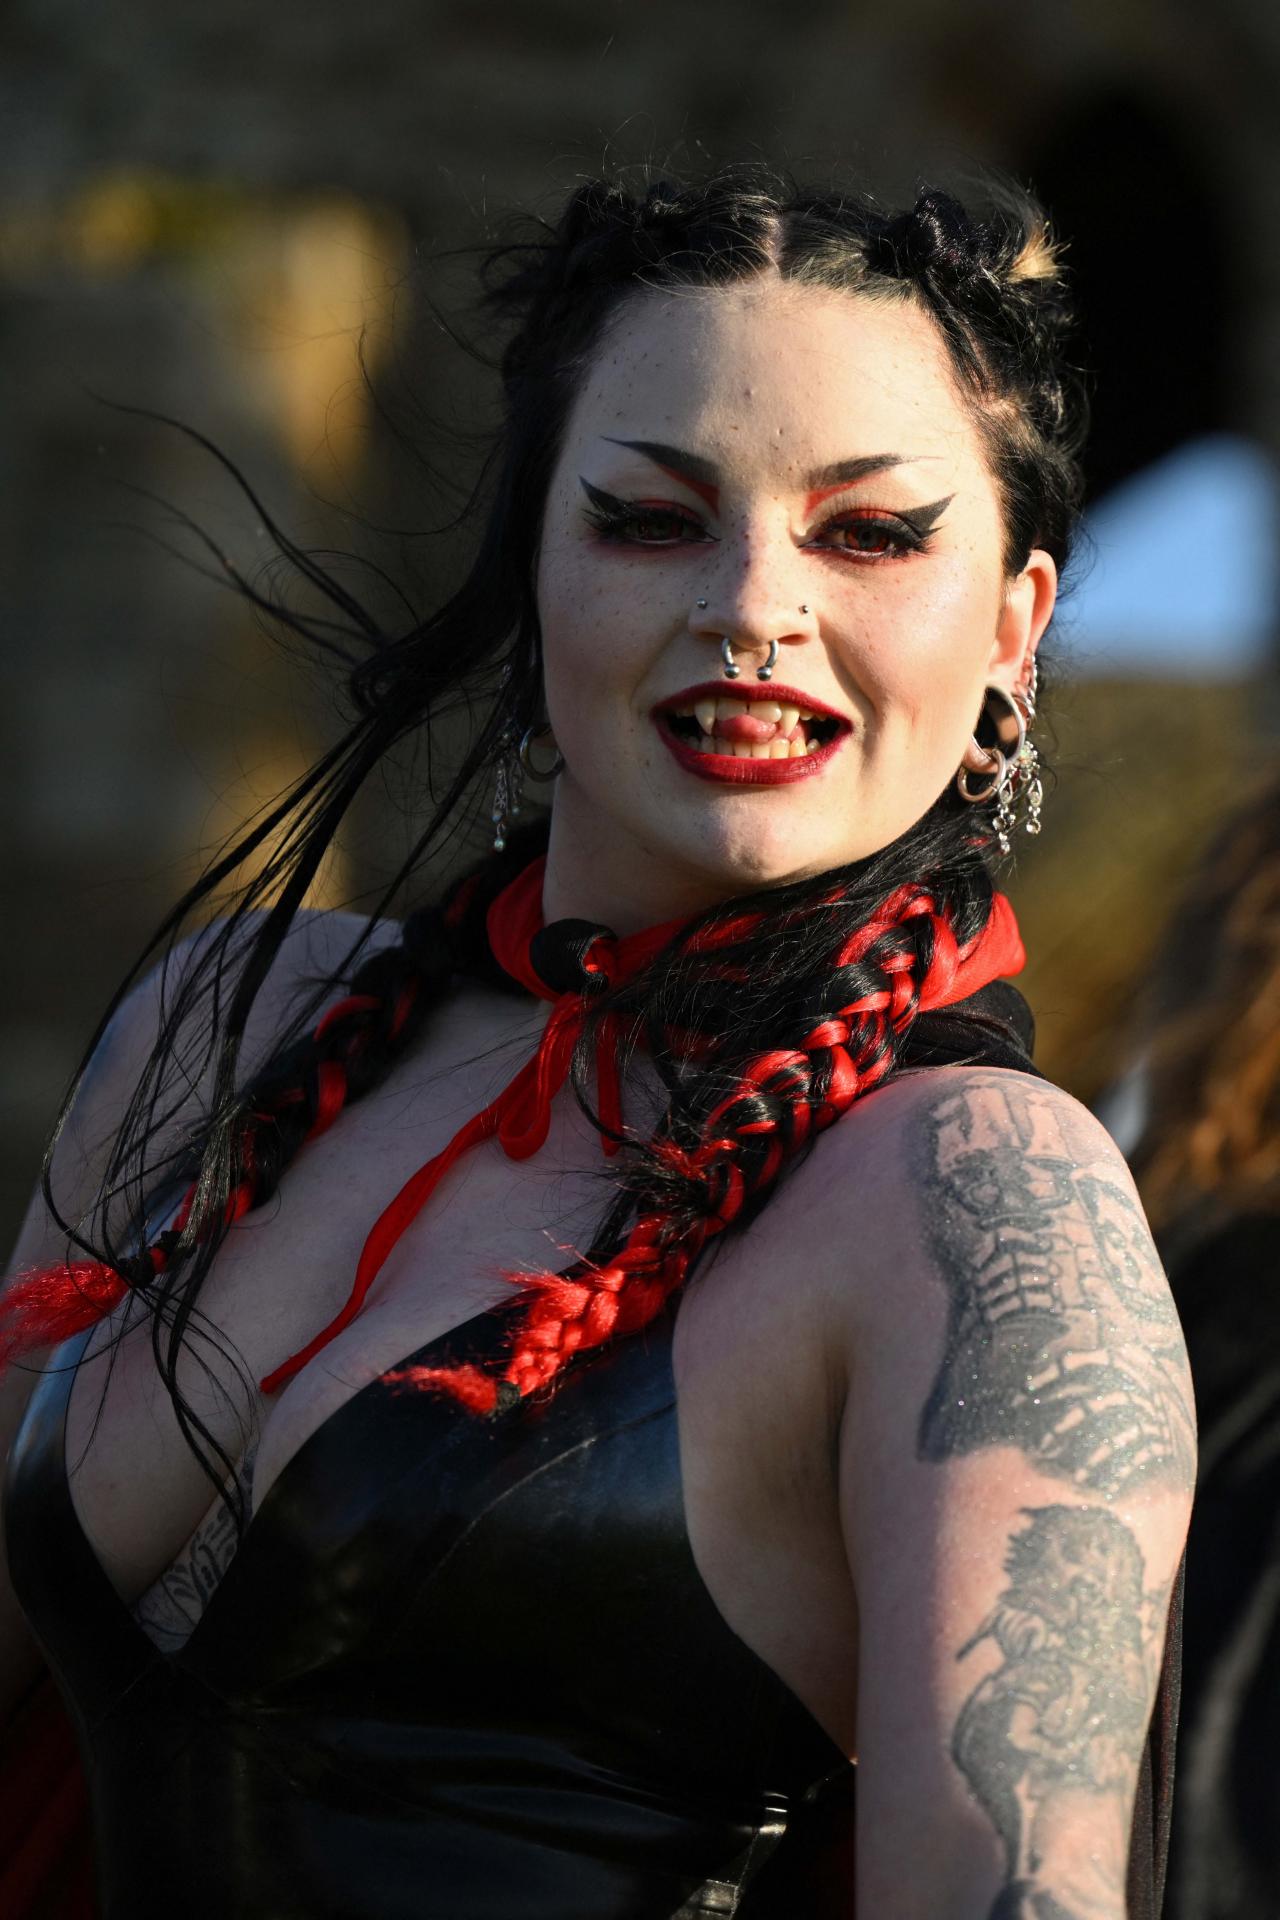 A vampire waits in the grounds of Whitby Abbey during a Guinness world record attempt to gather the largest number of vampires together in one place, in Whitby, north-east England on May 26, 2022. - The world record attempt takes place on the 125th anniversary of the first publication of Bram Stoker's novel 'Dracula'. Stoker visited Whitby in 1890 and it's understood that the town and 13th century gothic ruins of the Abbey provided inspiration for Dracula. The current record saw 1039 vampires gather at Doswell in Virginia, USA in 2011. (Photo by Oli SCARFF / AFP)